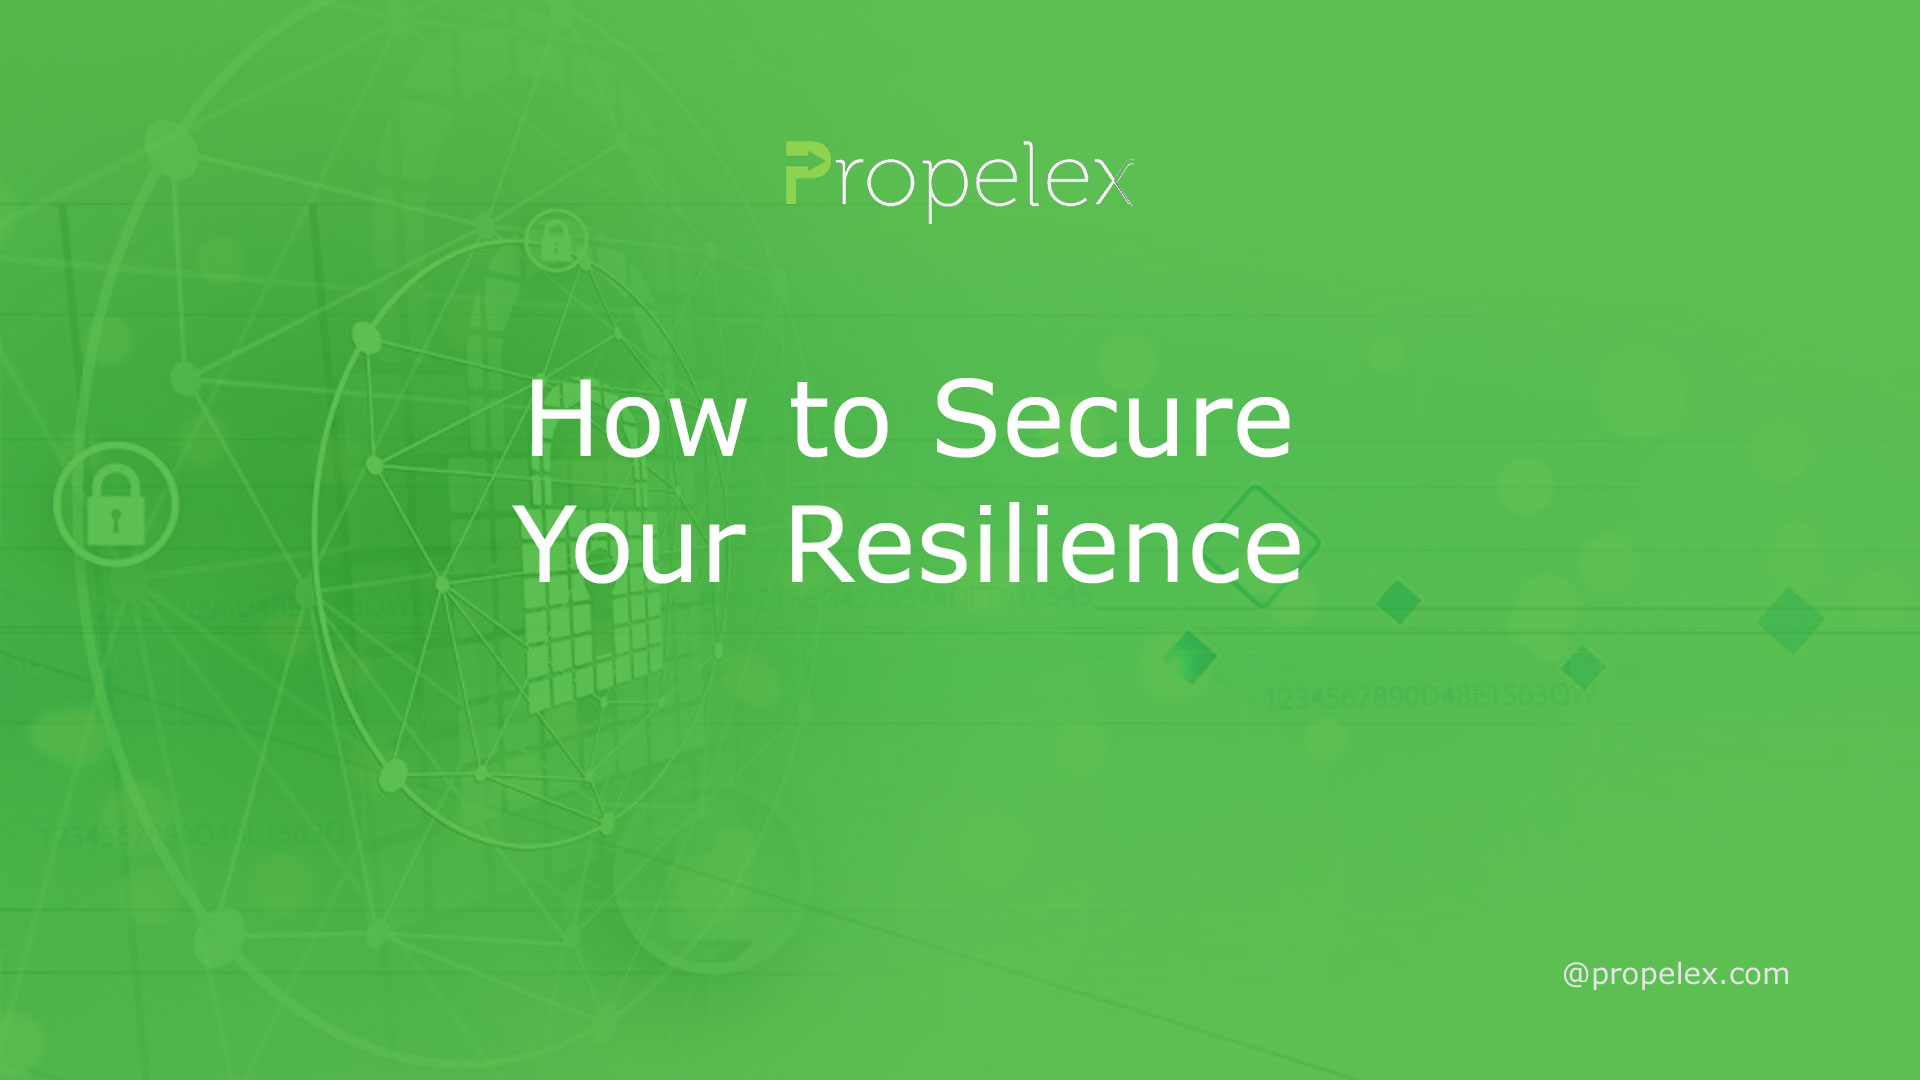 How to Secure Your Resilience